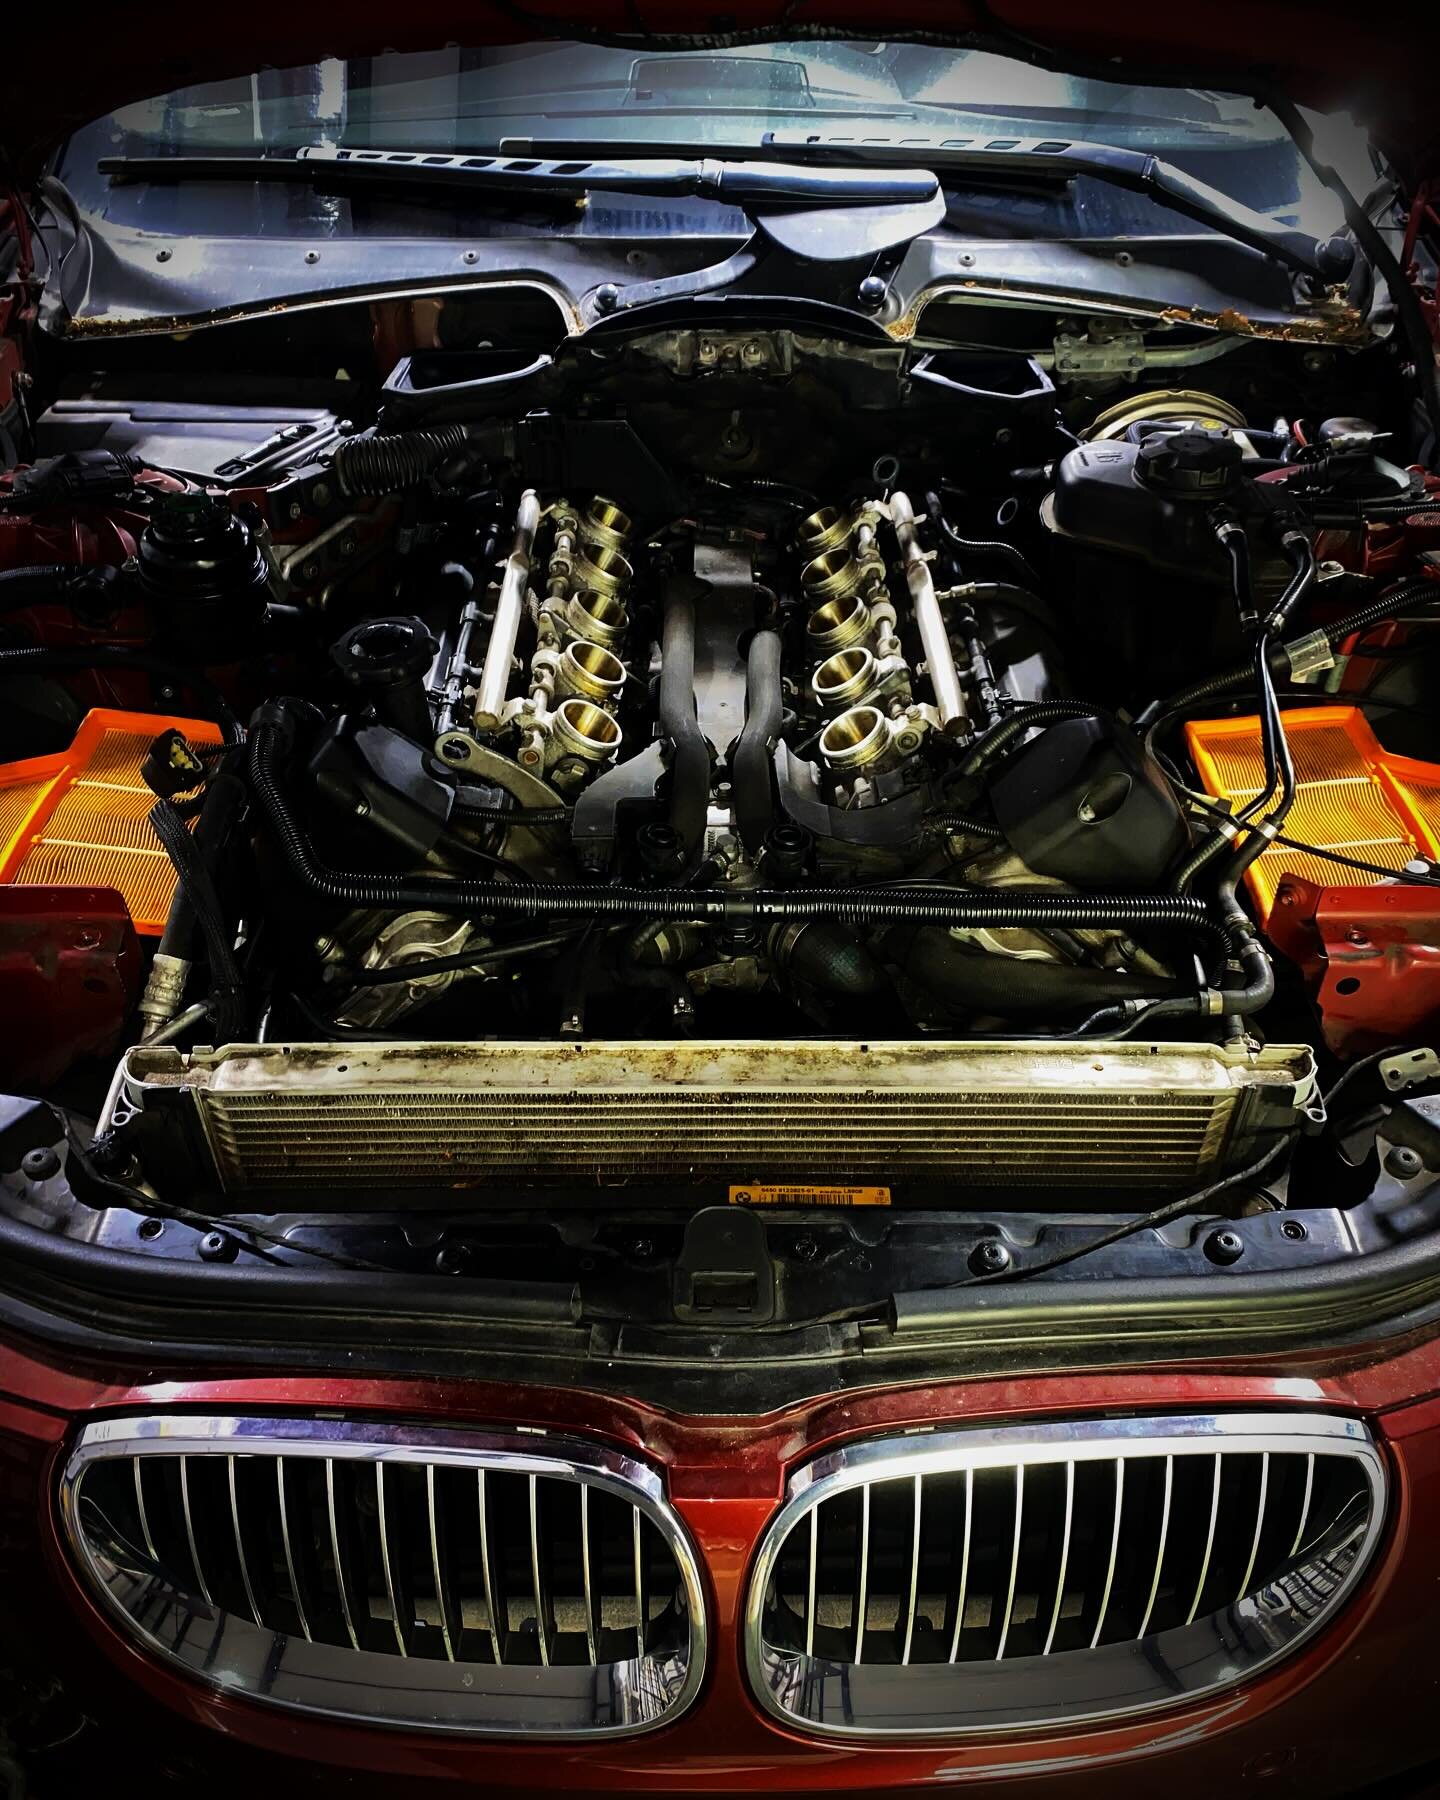 Lots of work being done on this M5&rsquo;s V10!